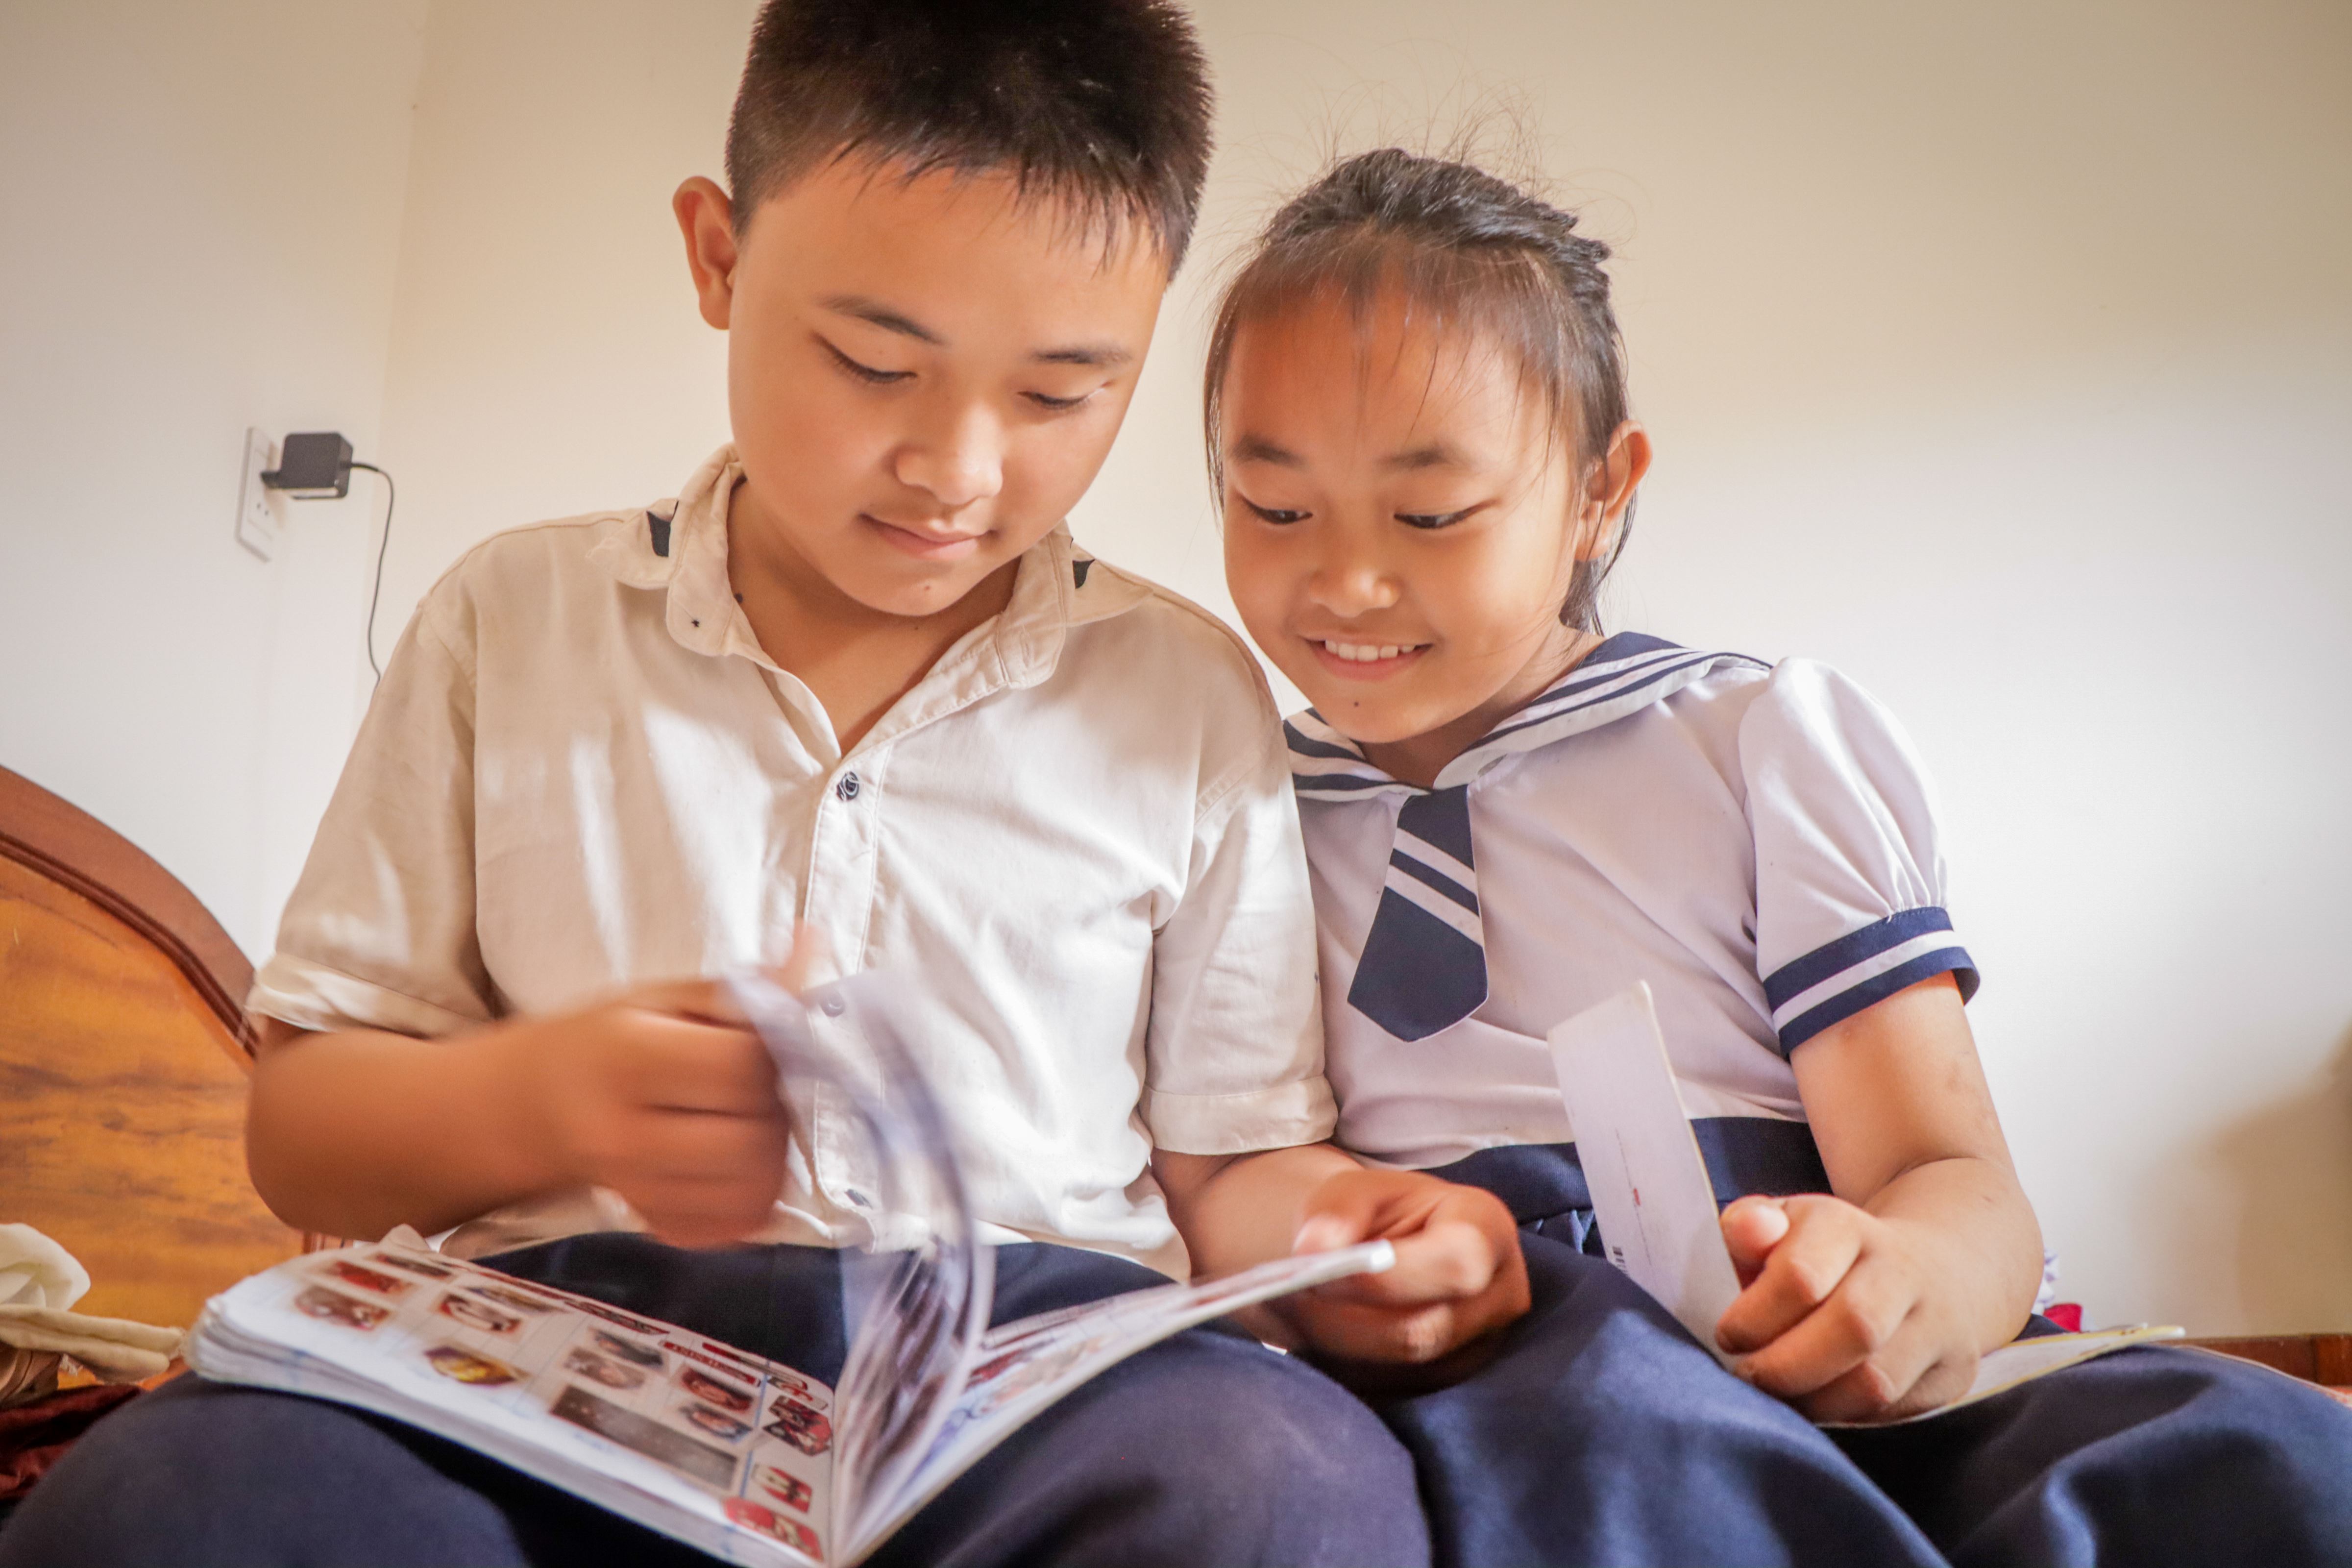 Viet from Vietnam keeps in touch with his sponsor Tracy through heart-warming letters